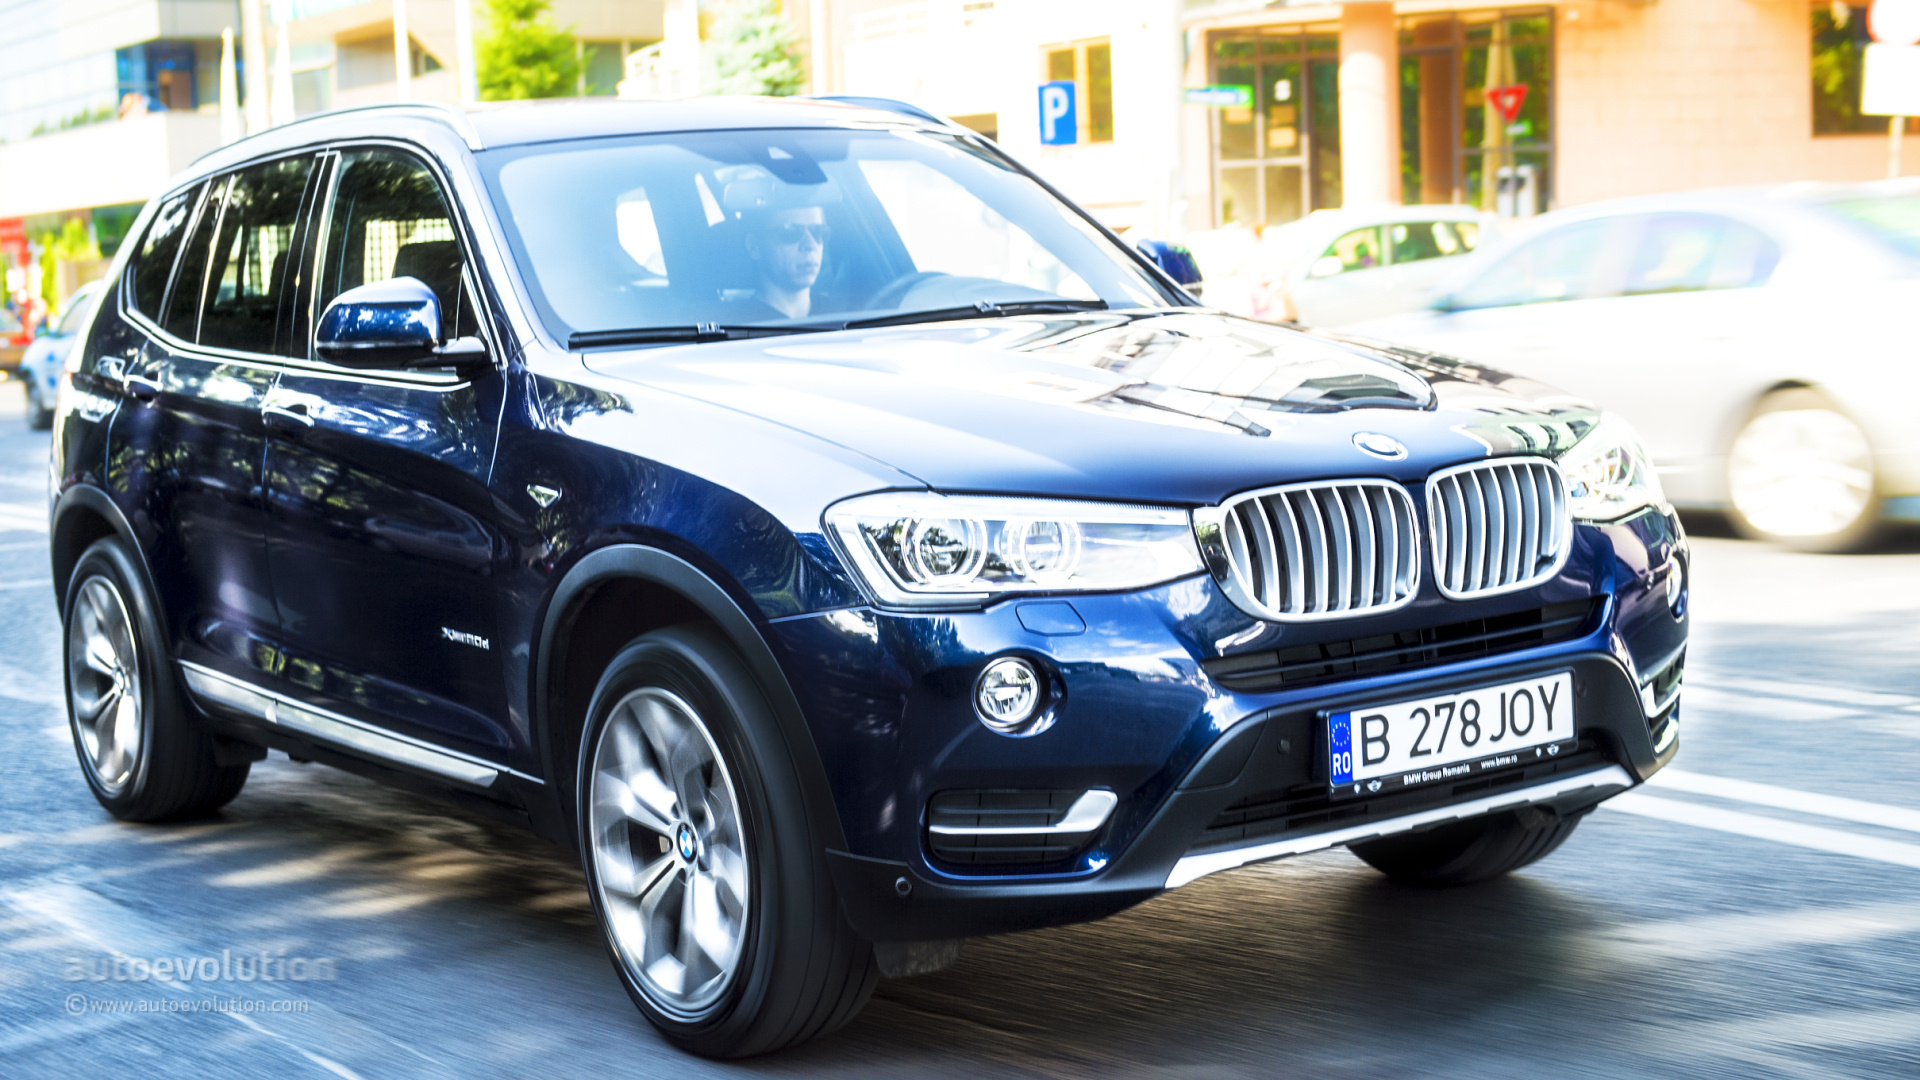 2015 BMW X3 LCI Backgrounds on Wallpapers Vista